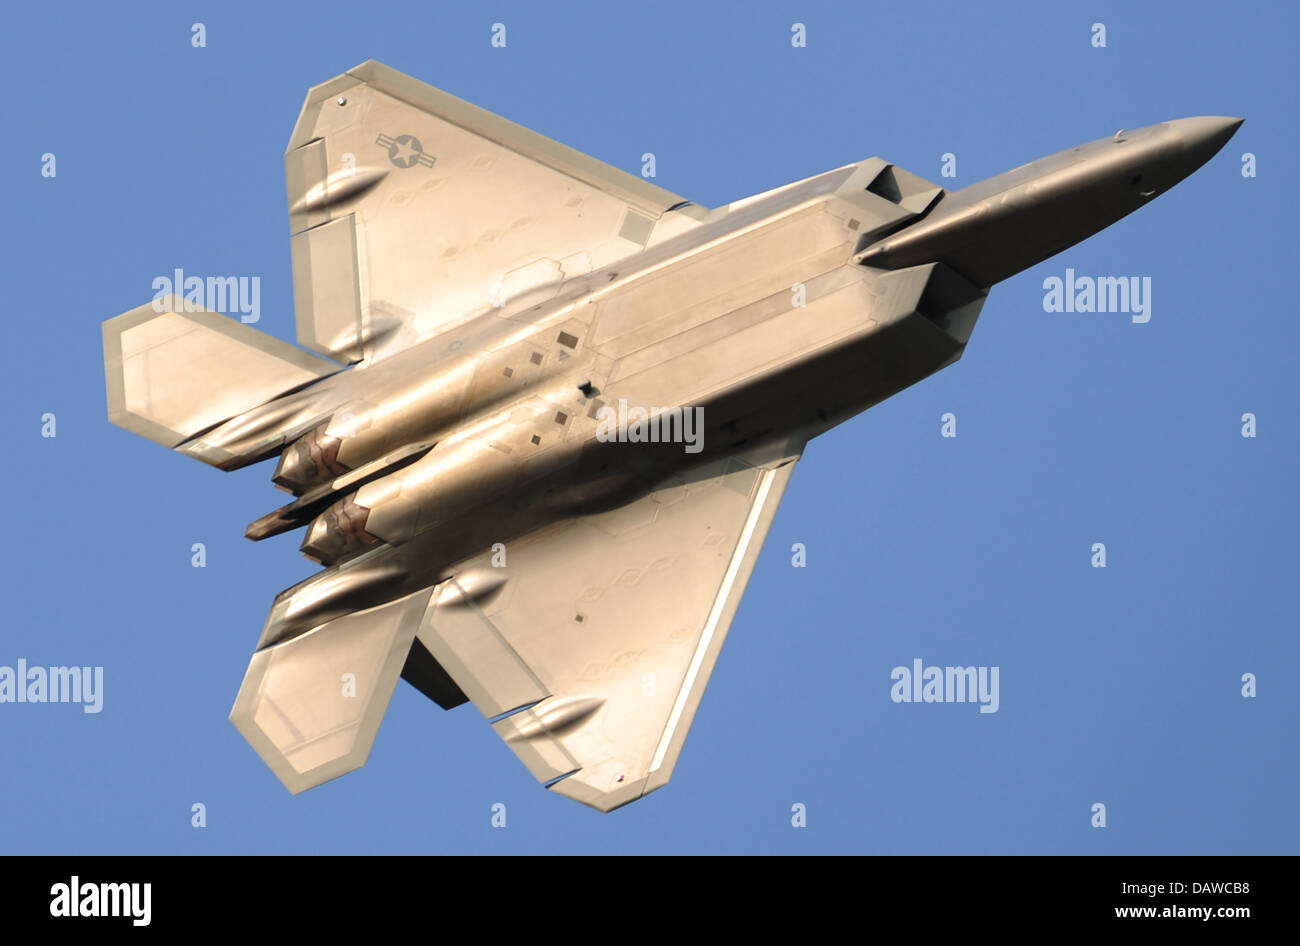 A US Air Force F-22 Raptor stealth fighter aircraft maneuvers during a training operations July 19, 2013 at Joint Base Elmendorf Richardson, Alaska. Stock Photo